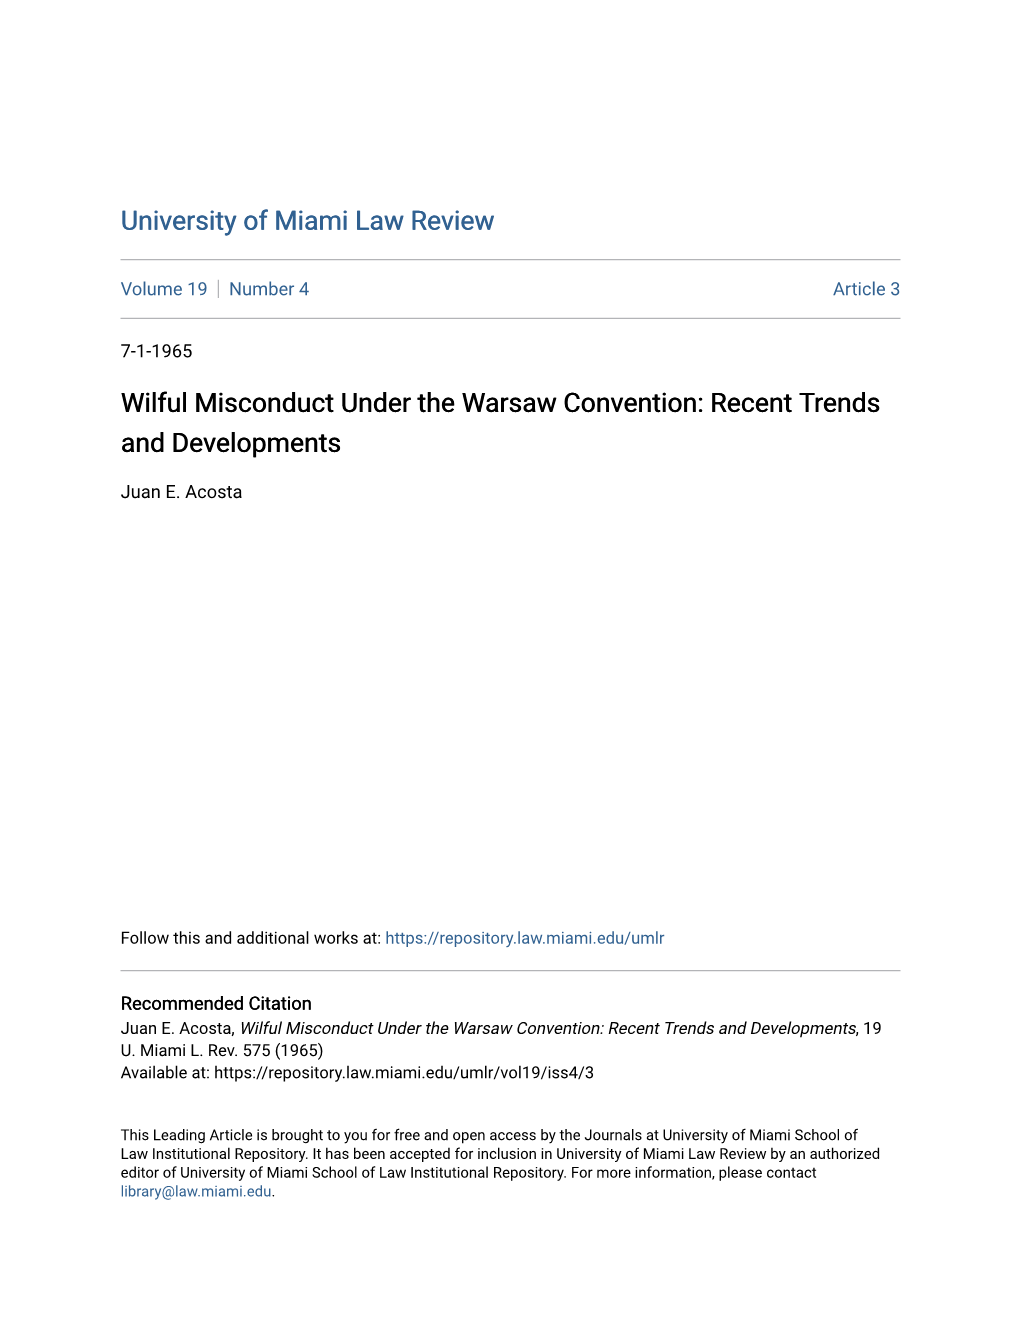 Wilful Misconduct Under the Warsaw Convention: Recent Trends and Developments